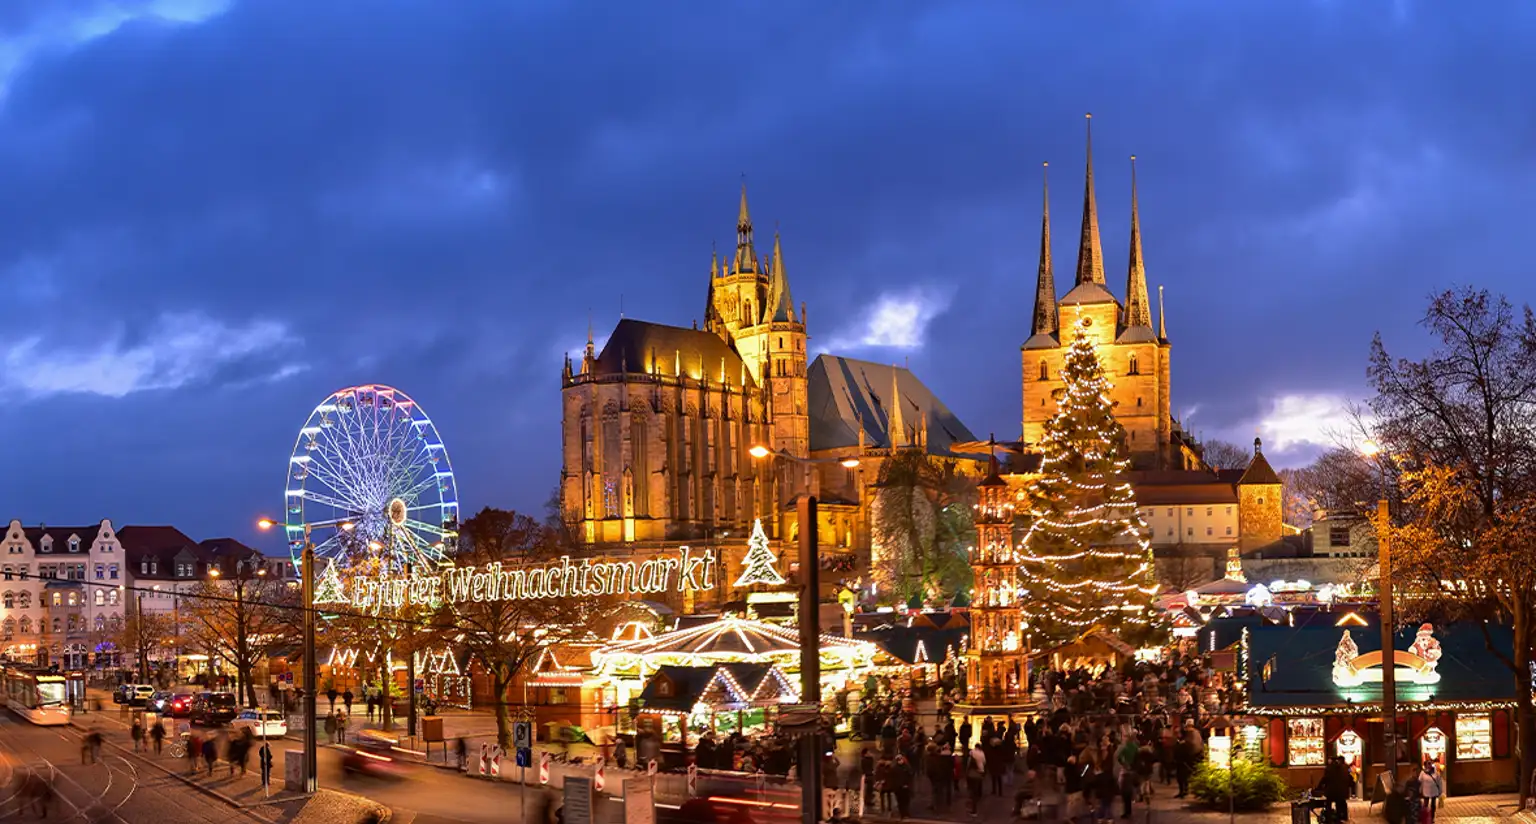 Where are the best Christmas markets in Europe?